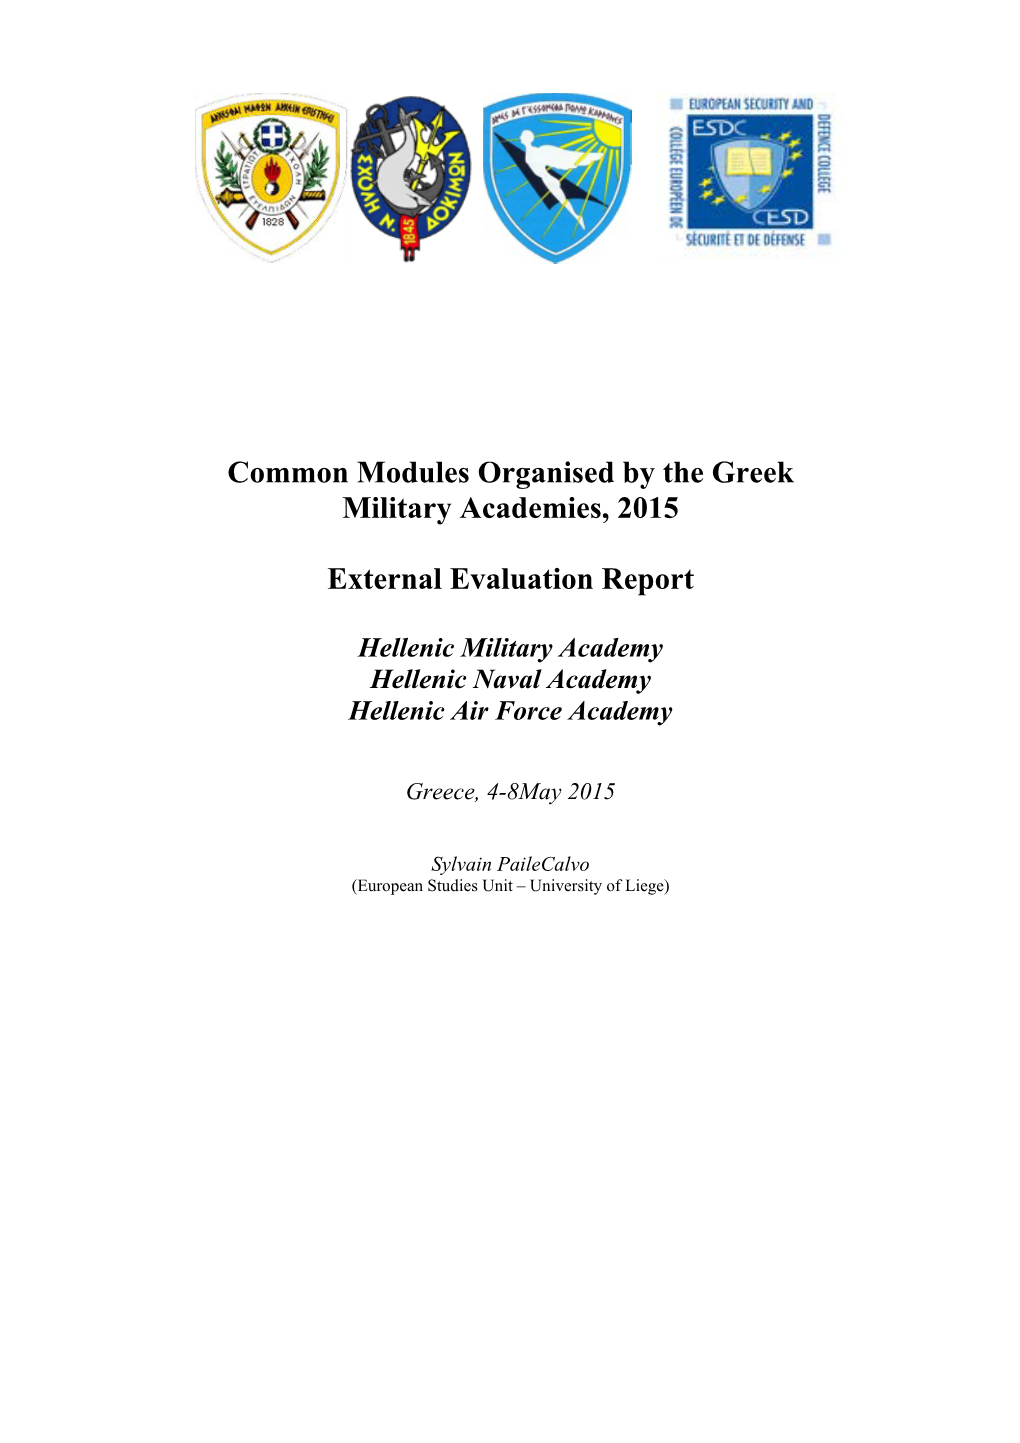 Common Modules Organised by the Greek Military Academies, 2015